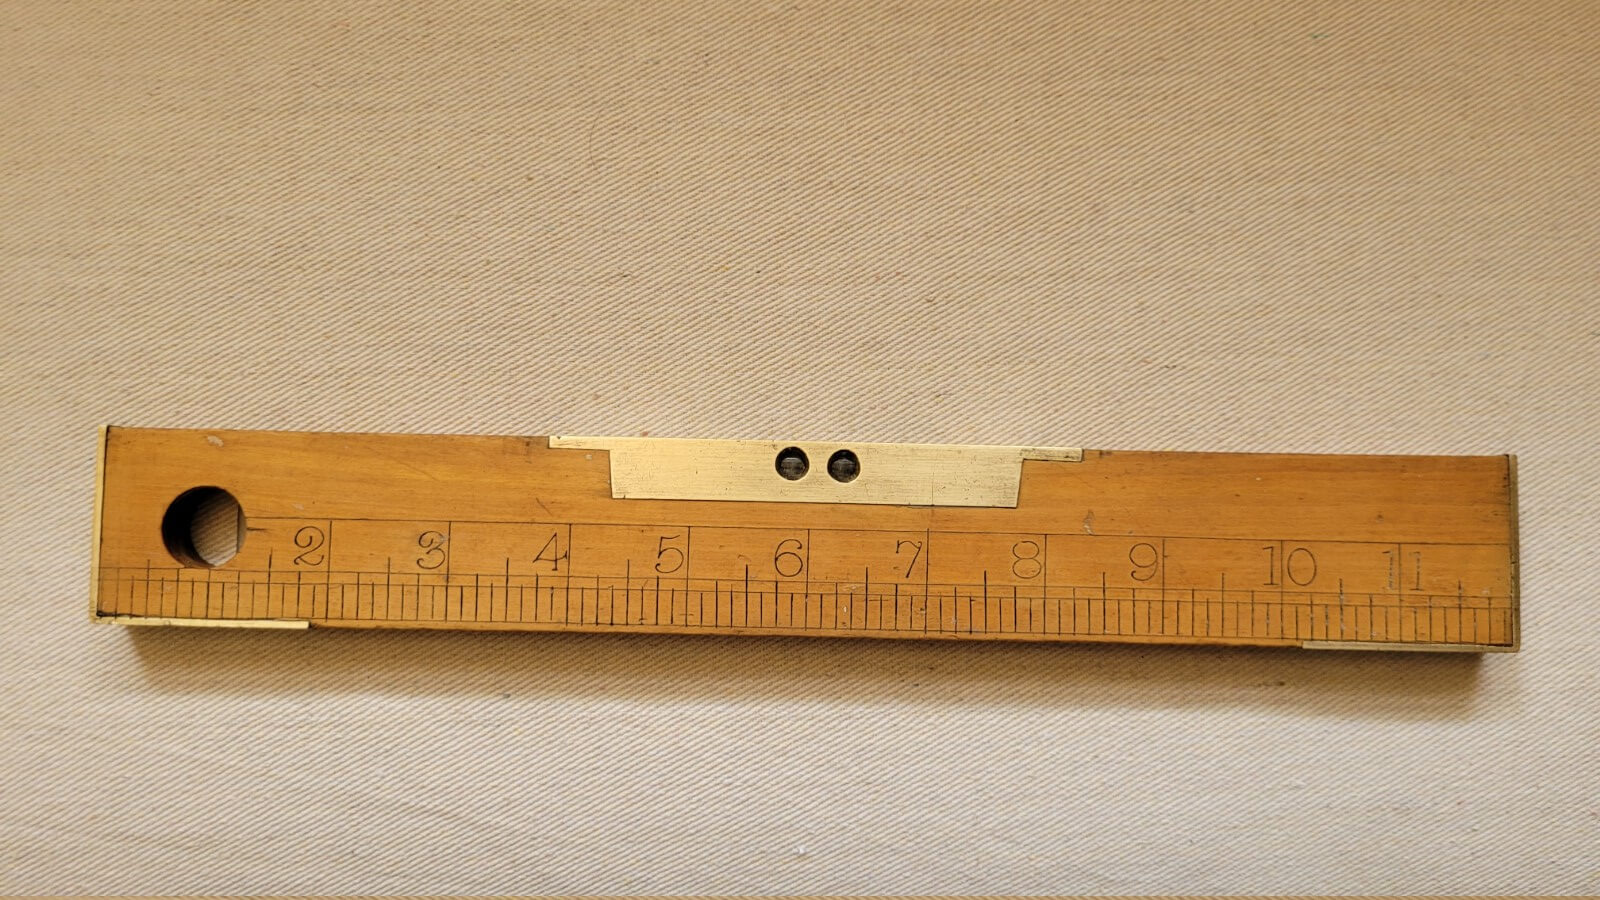 Vintage Brass & Wood Carpetner Level 12 Inches Glass Bubbles - Antique Marking and Measuring Hand Tools